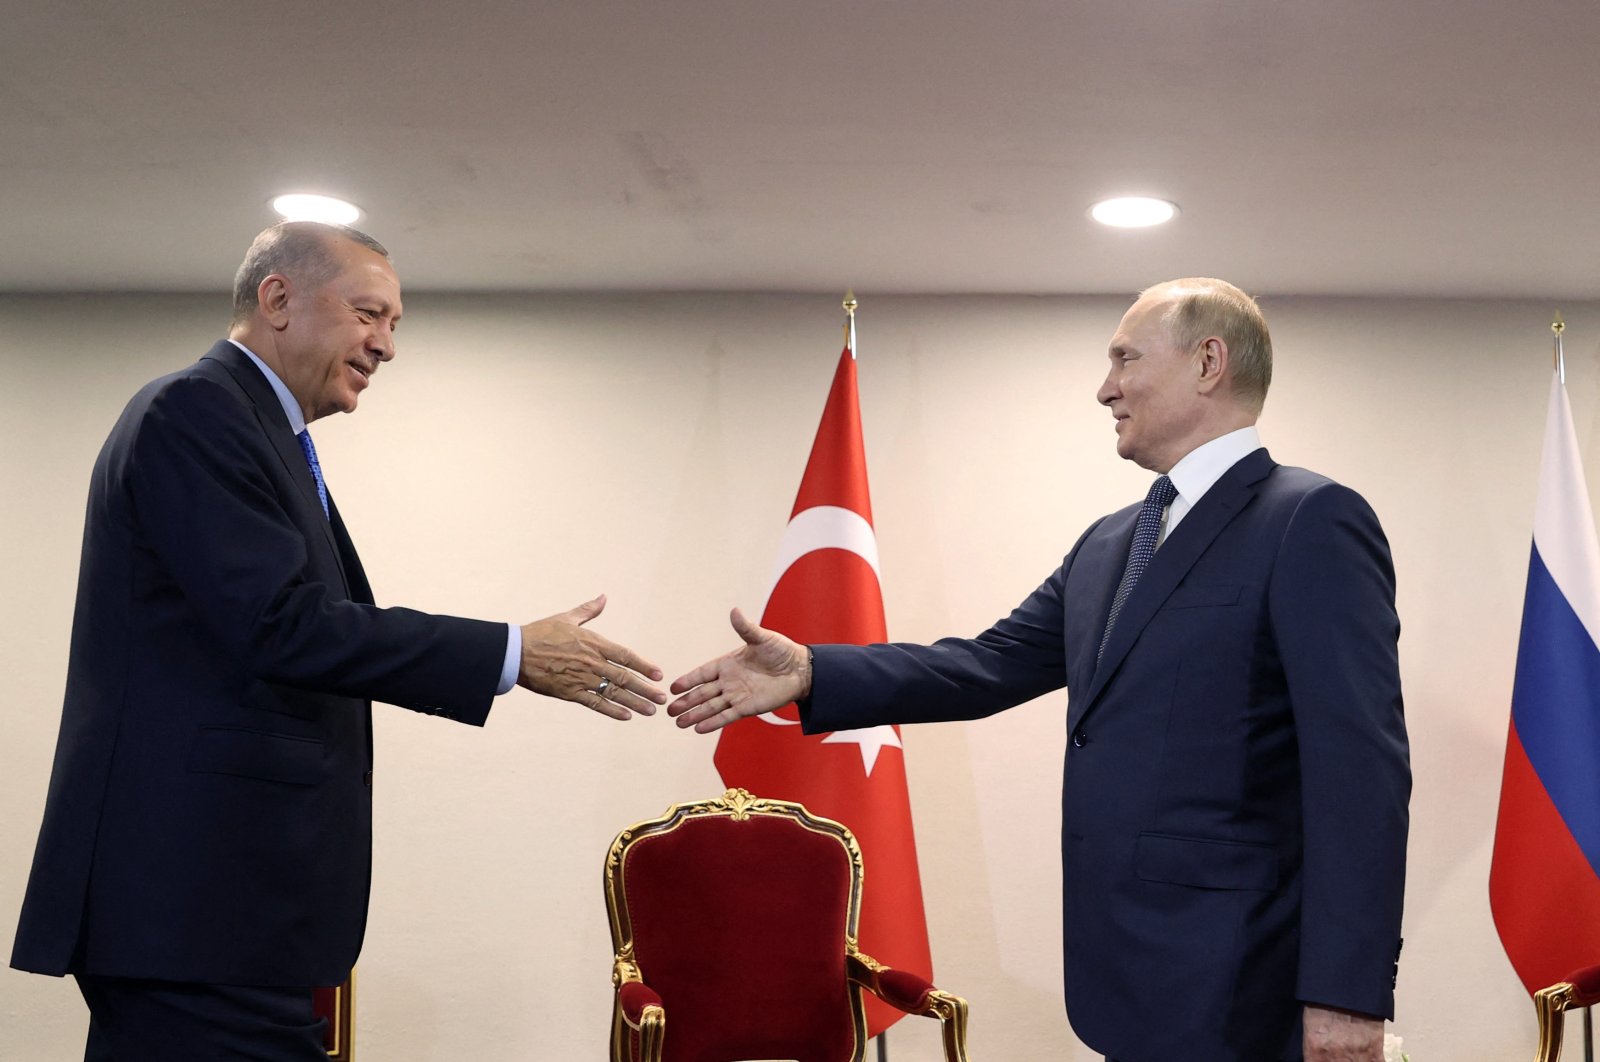 President Recep Tayyip Erdoğan shakes hands with Russian President Vladimir Putin during a meeting as part of the Astana Trilateral Summit at the Tehran International Conference Hall in Tehran, Iran, July 19, 2022. (AFP)